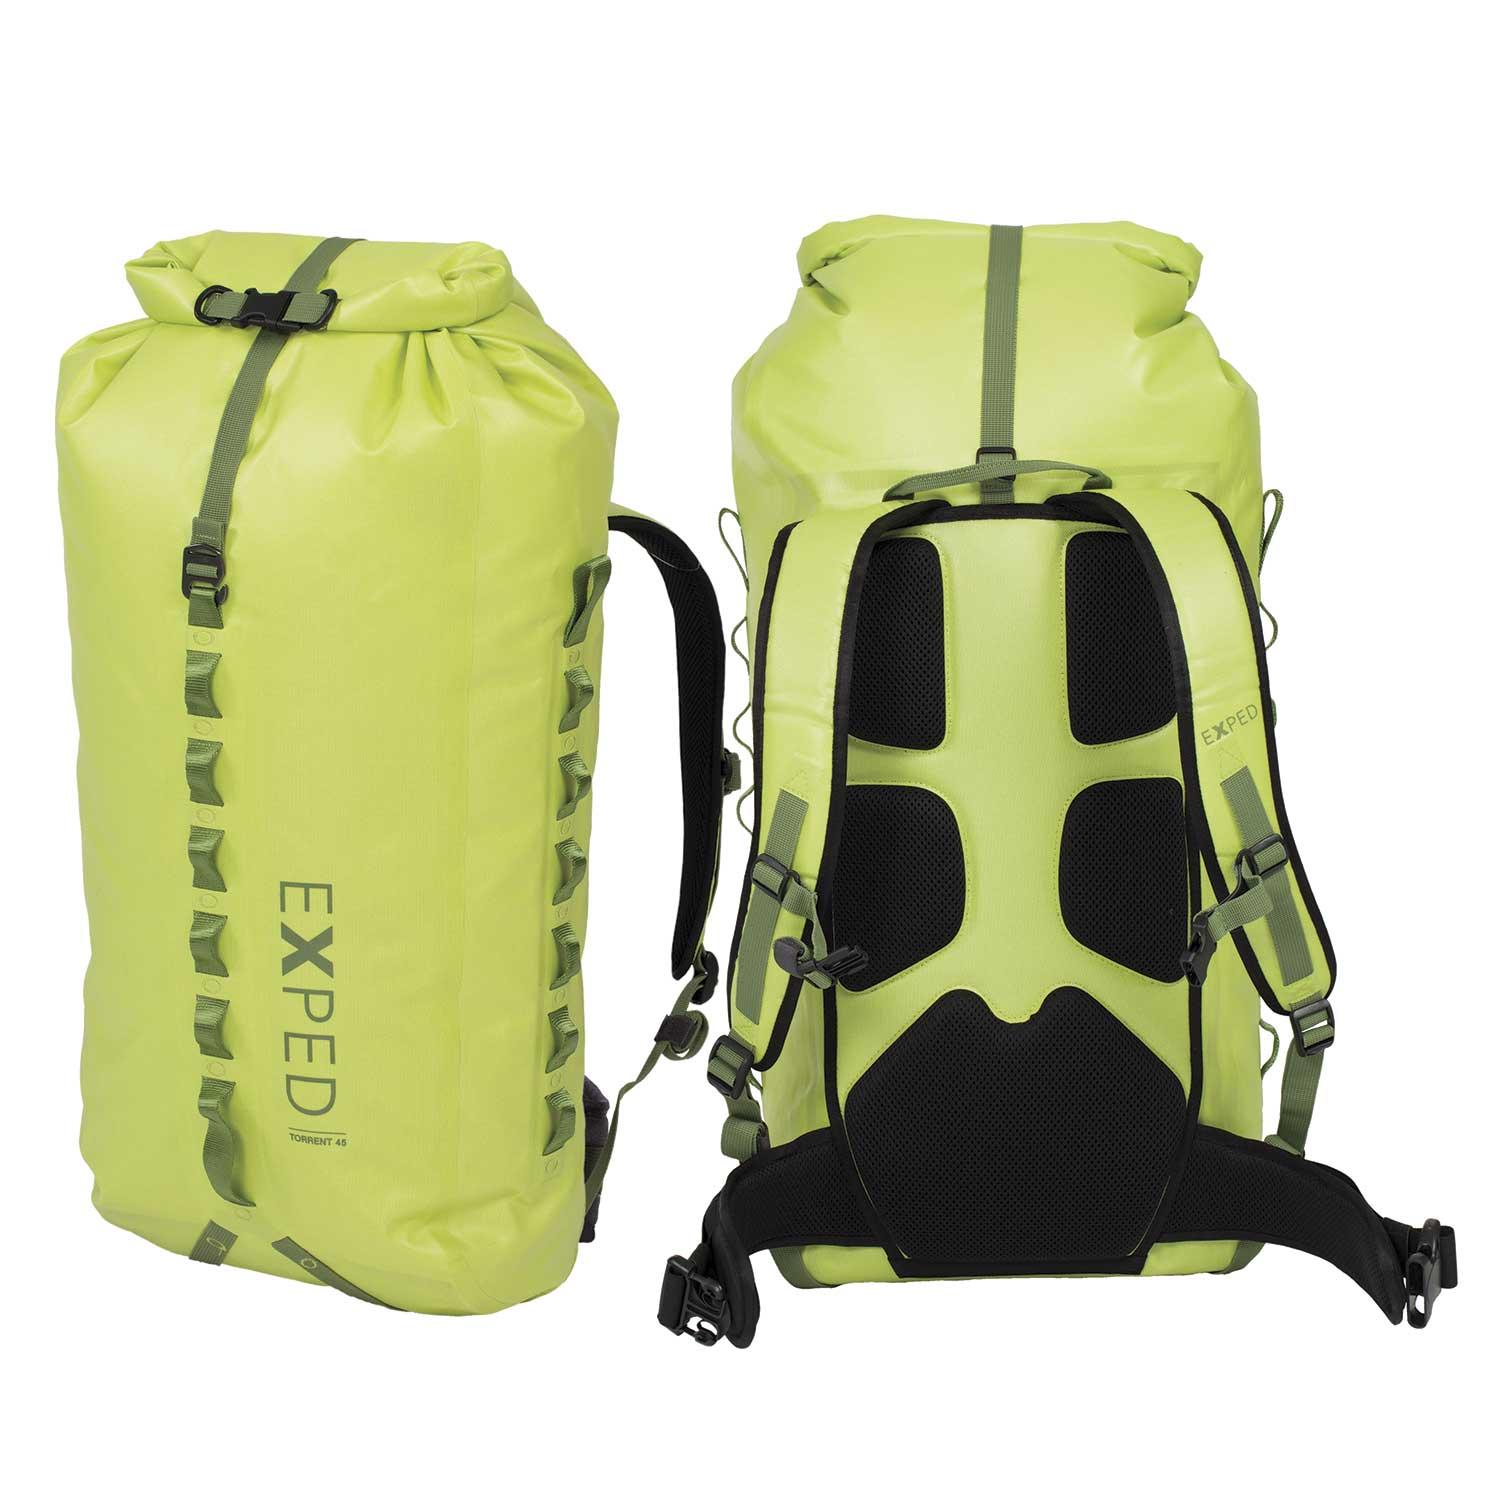 exped backpacks